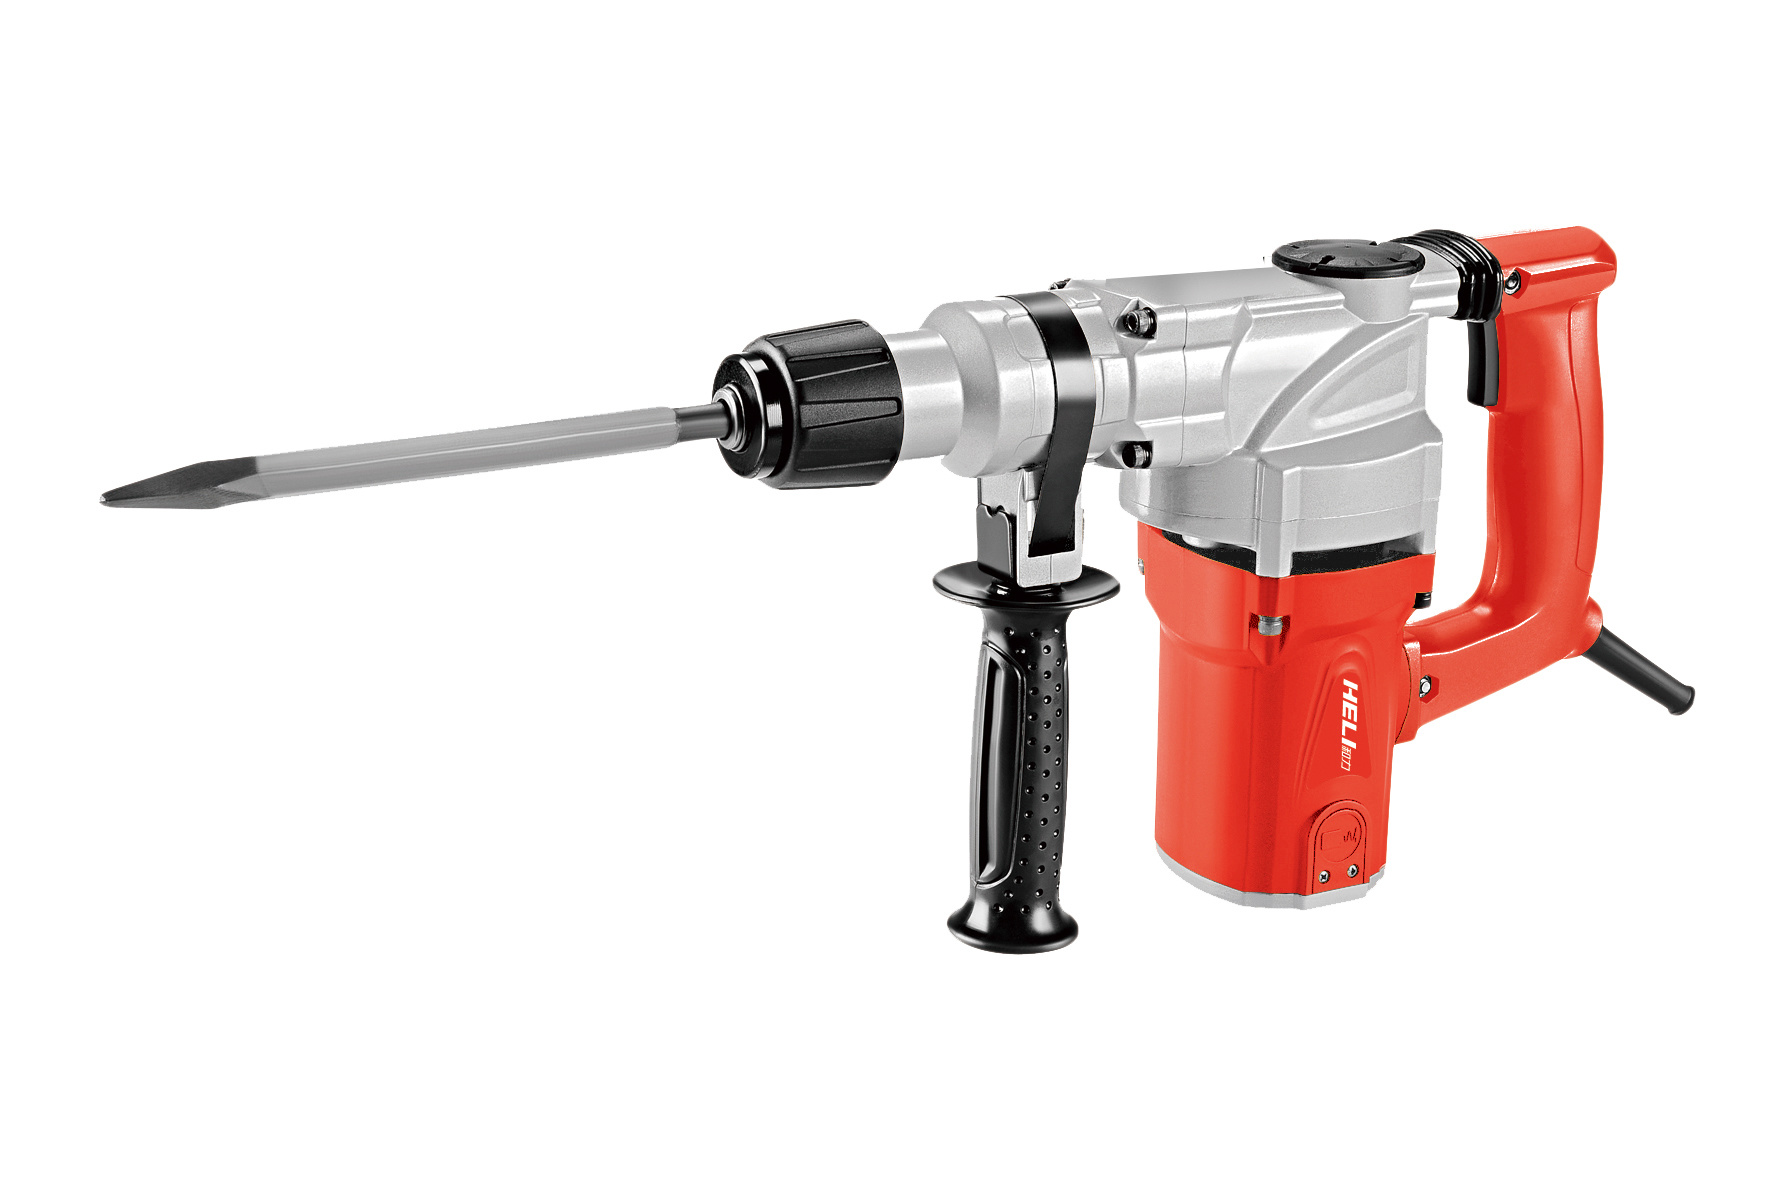 Classic Model Two Fuction Rotary Hammer